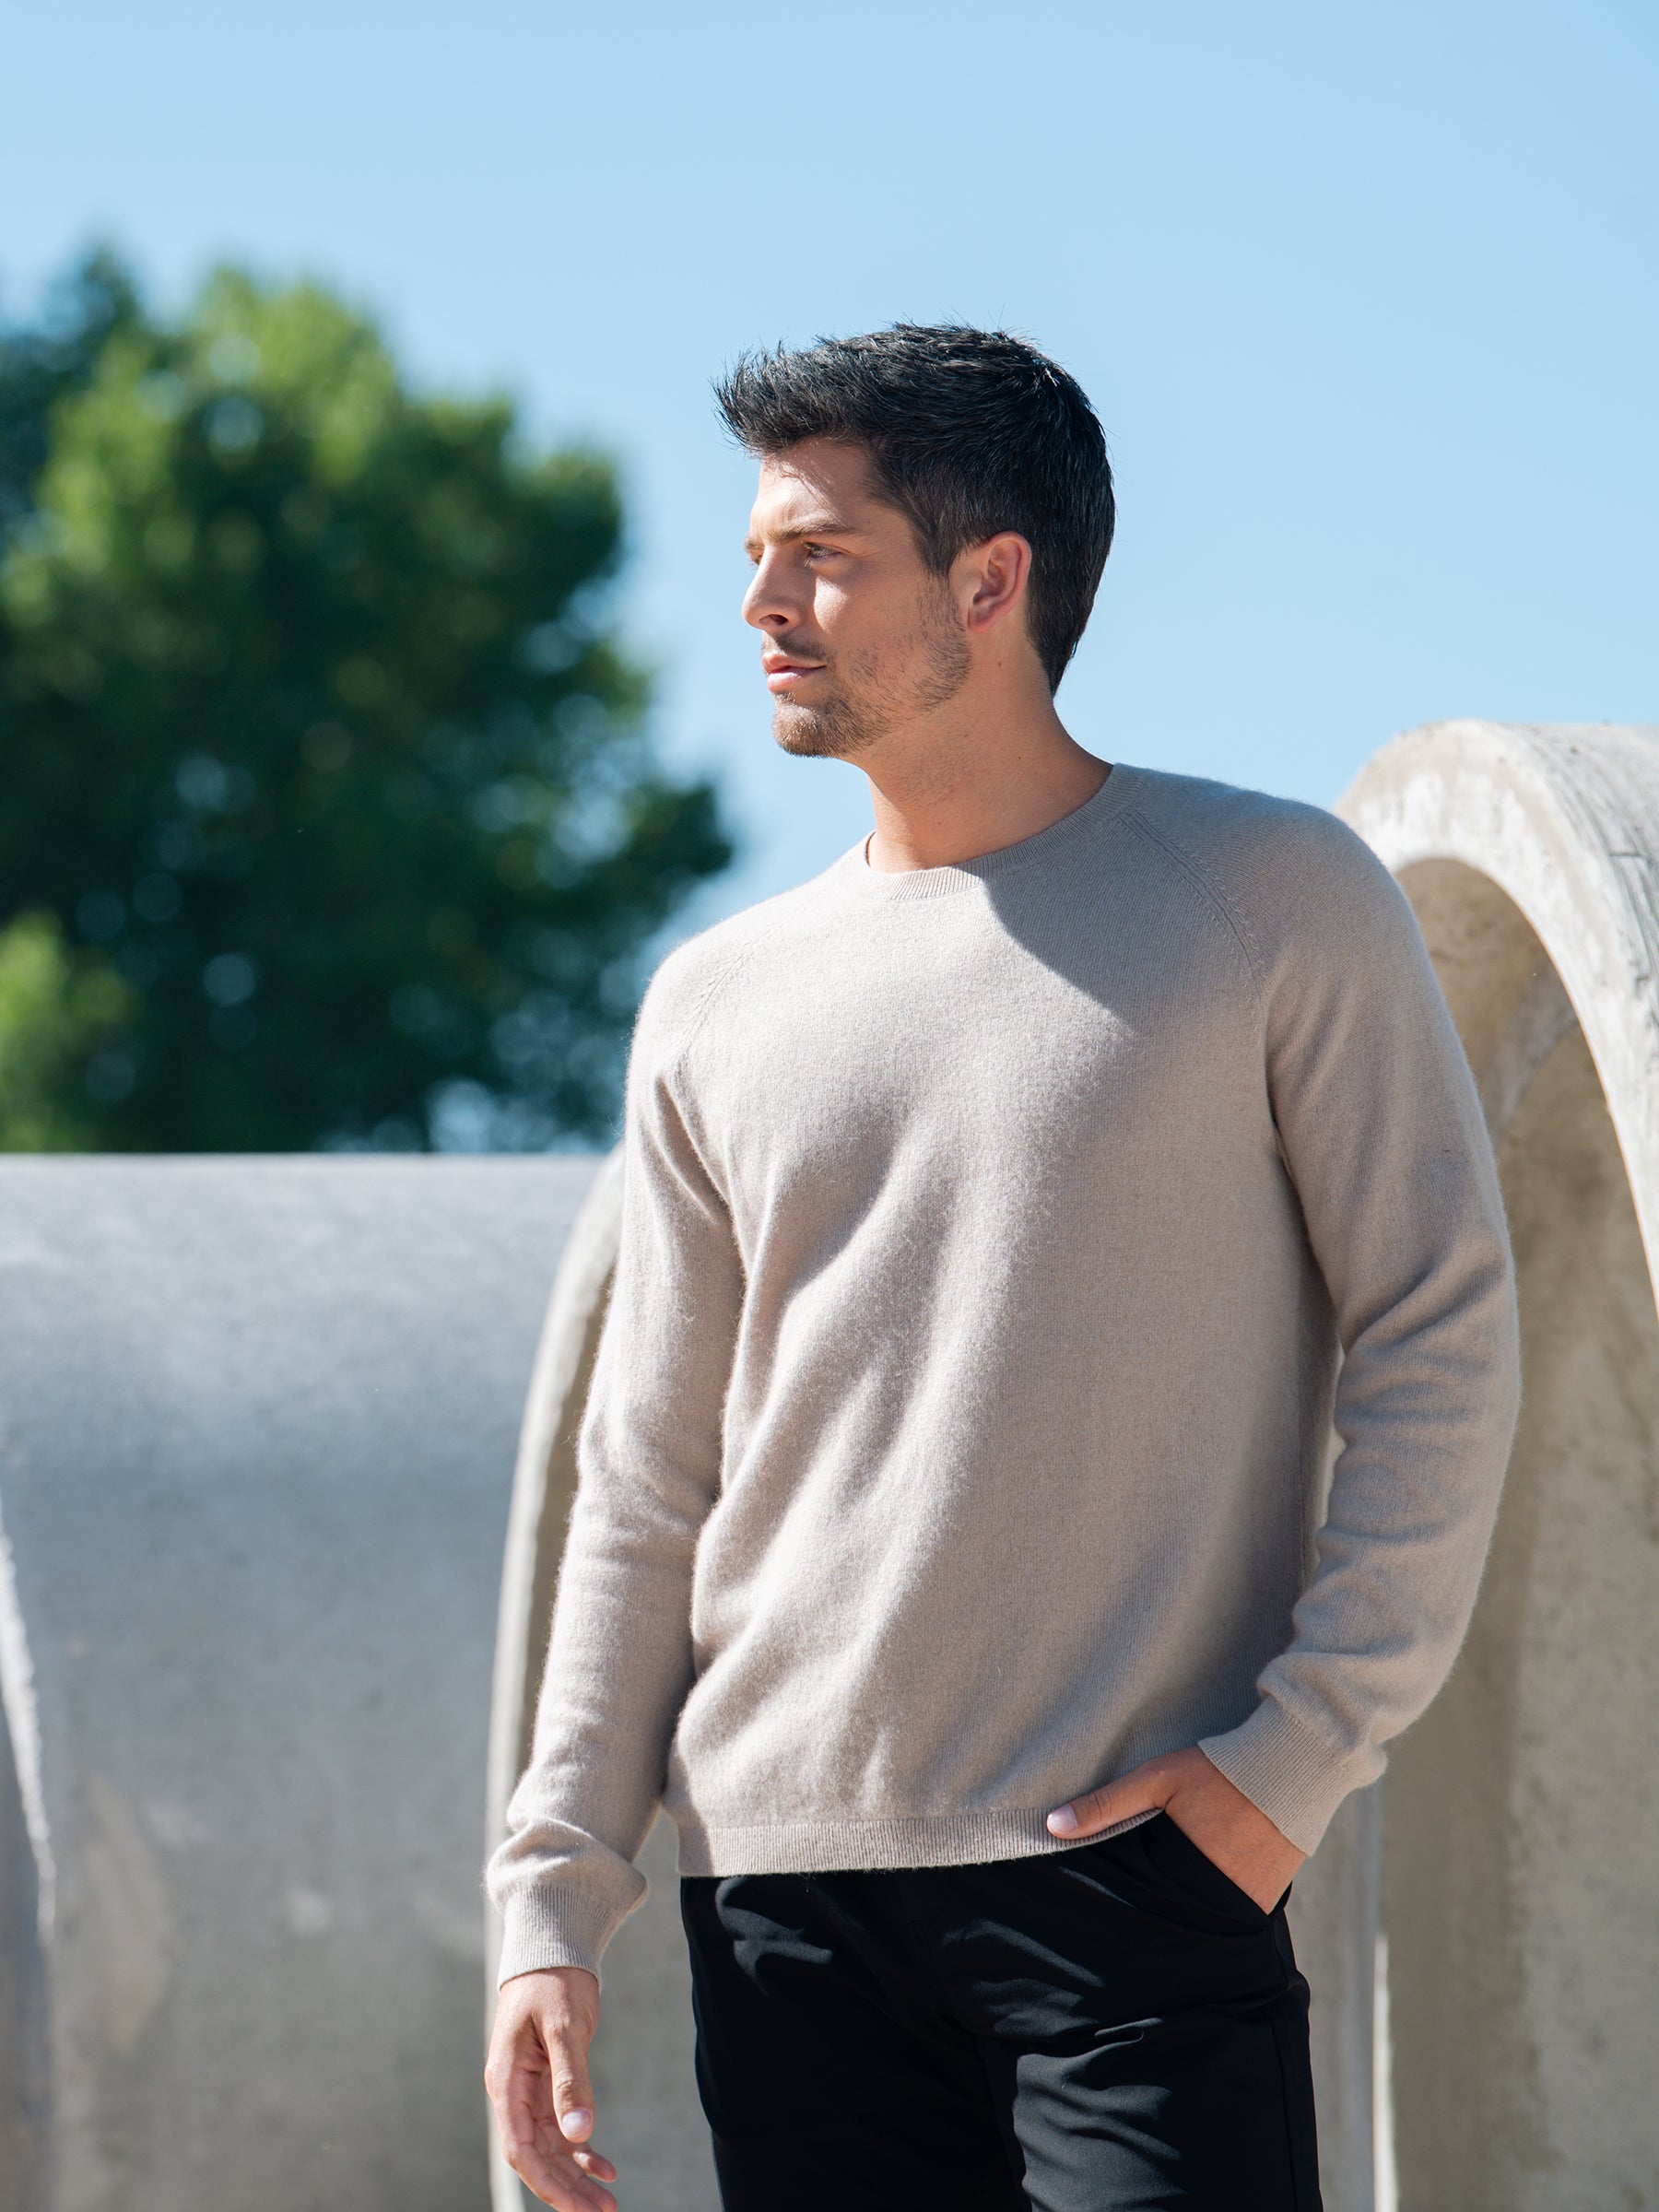 A man with short black hair is standing outdoors on a sunny day, wearing a light beige Men's Crewneck Sweater from Cozy Earth and black pants. His left hand is in his pants pocket, and he is looking to his left. Large circular concrete structures and a tree are in the background. |Color:Sandstone